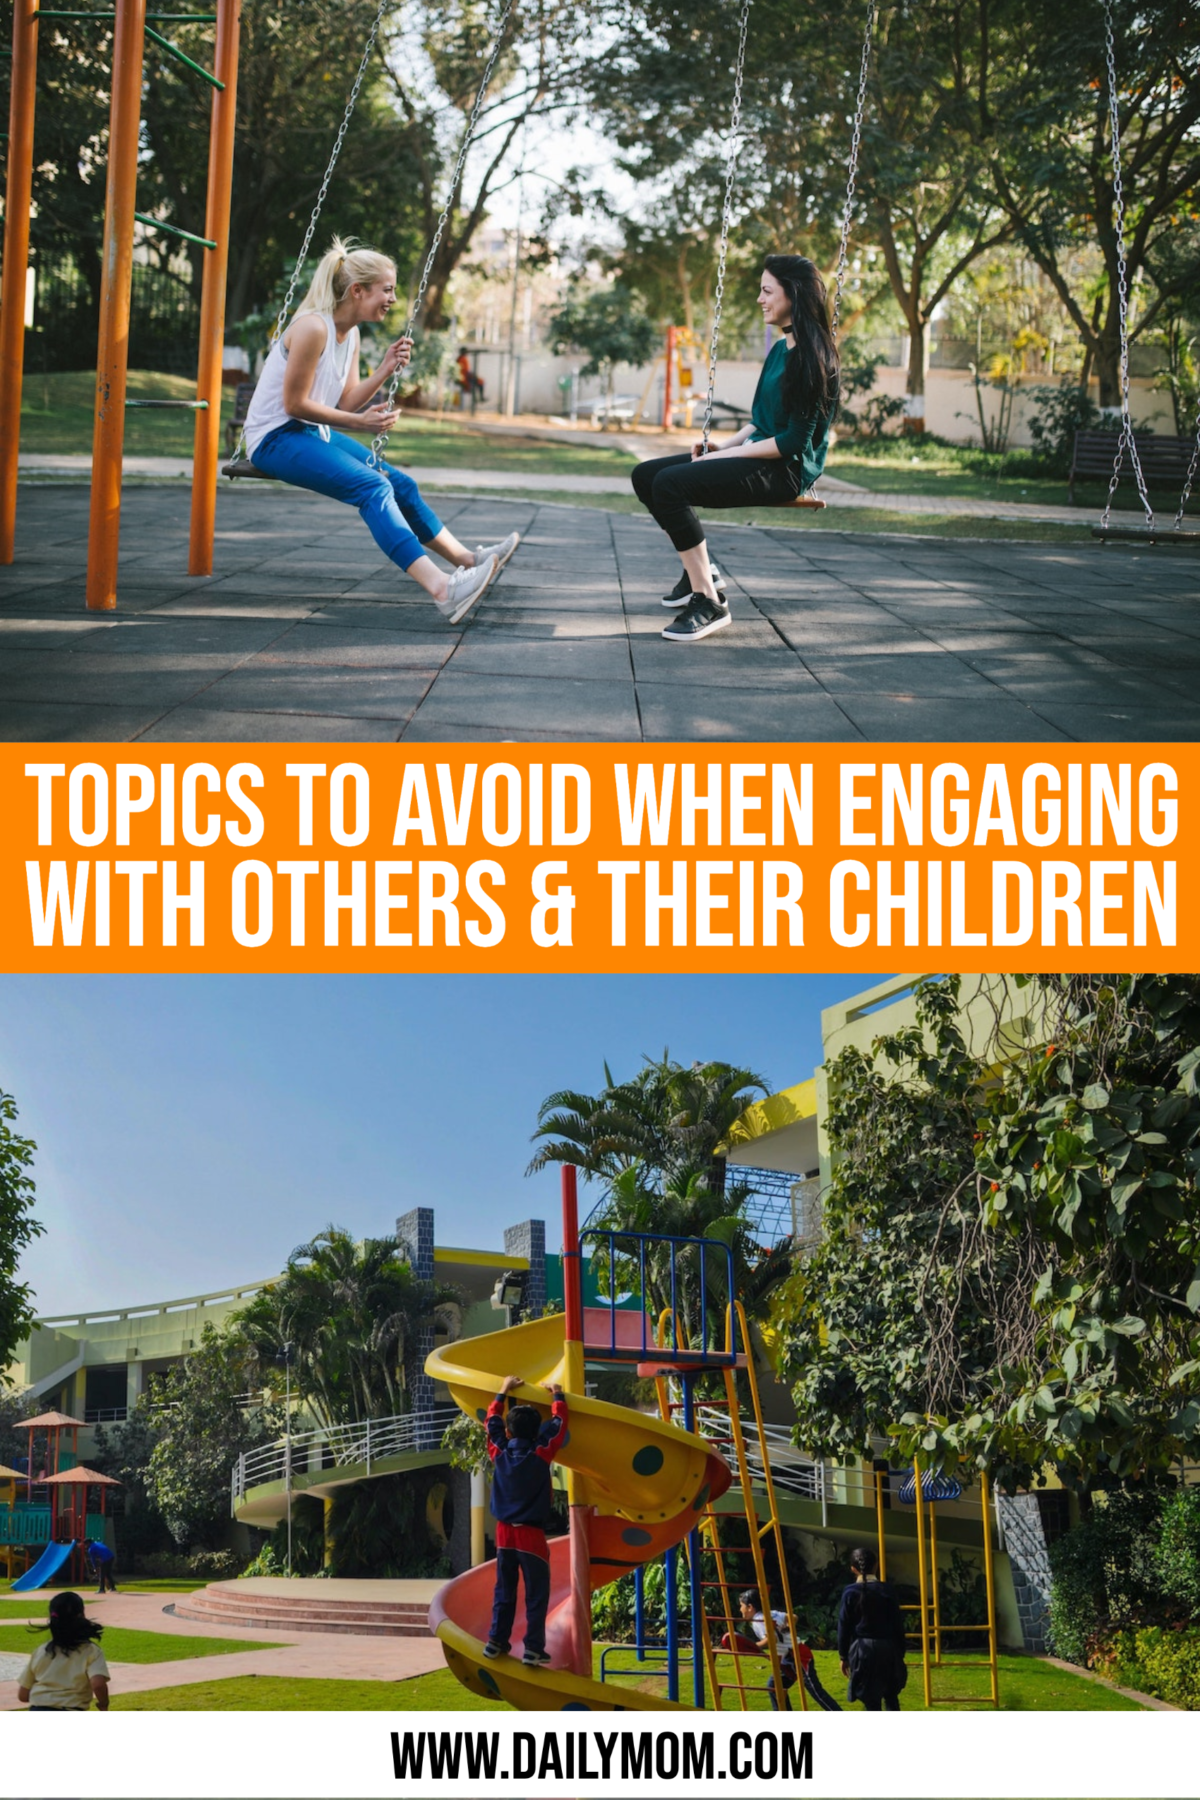 4 Topics To Avoid When Engaging With Others & Their Children